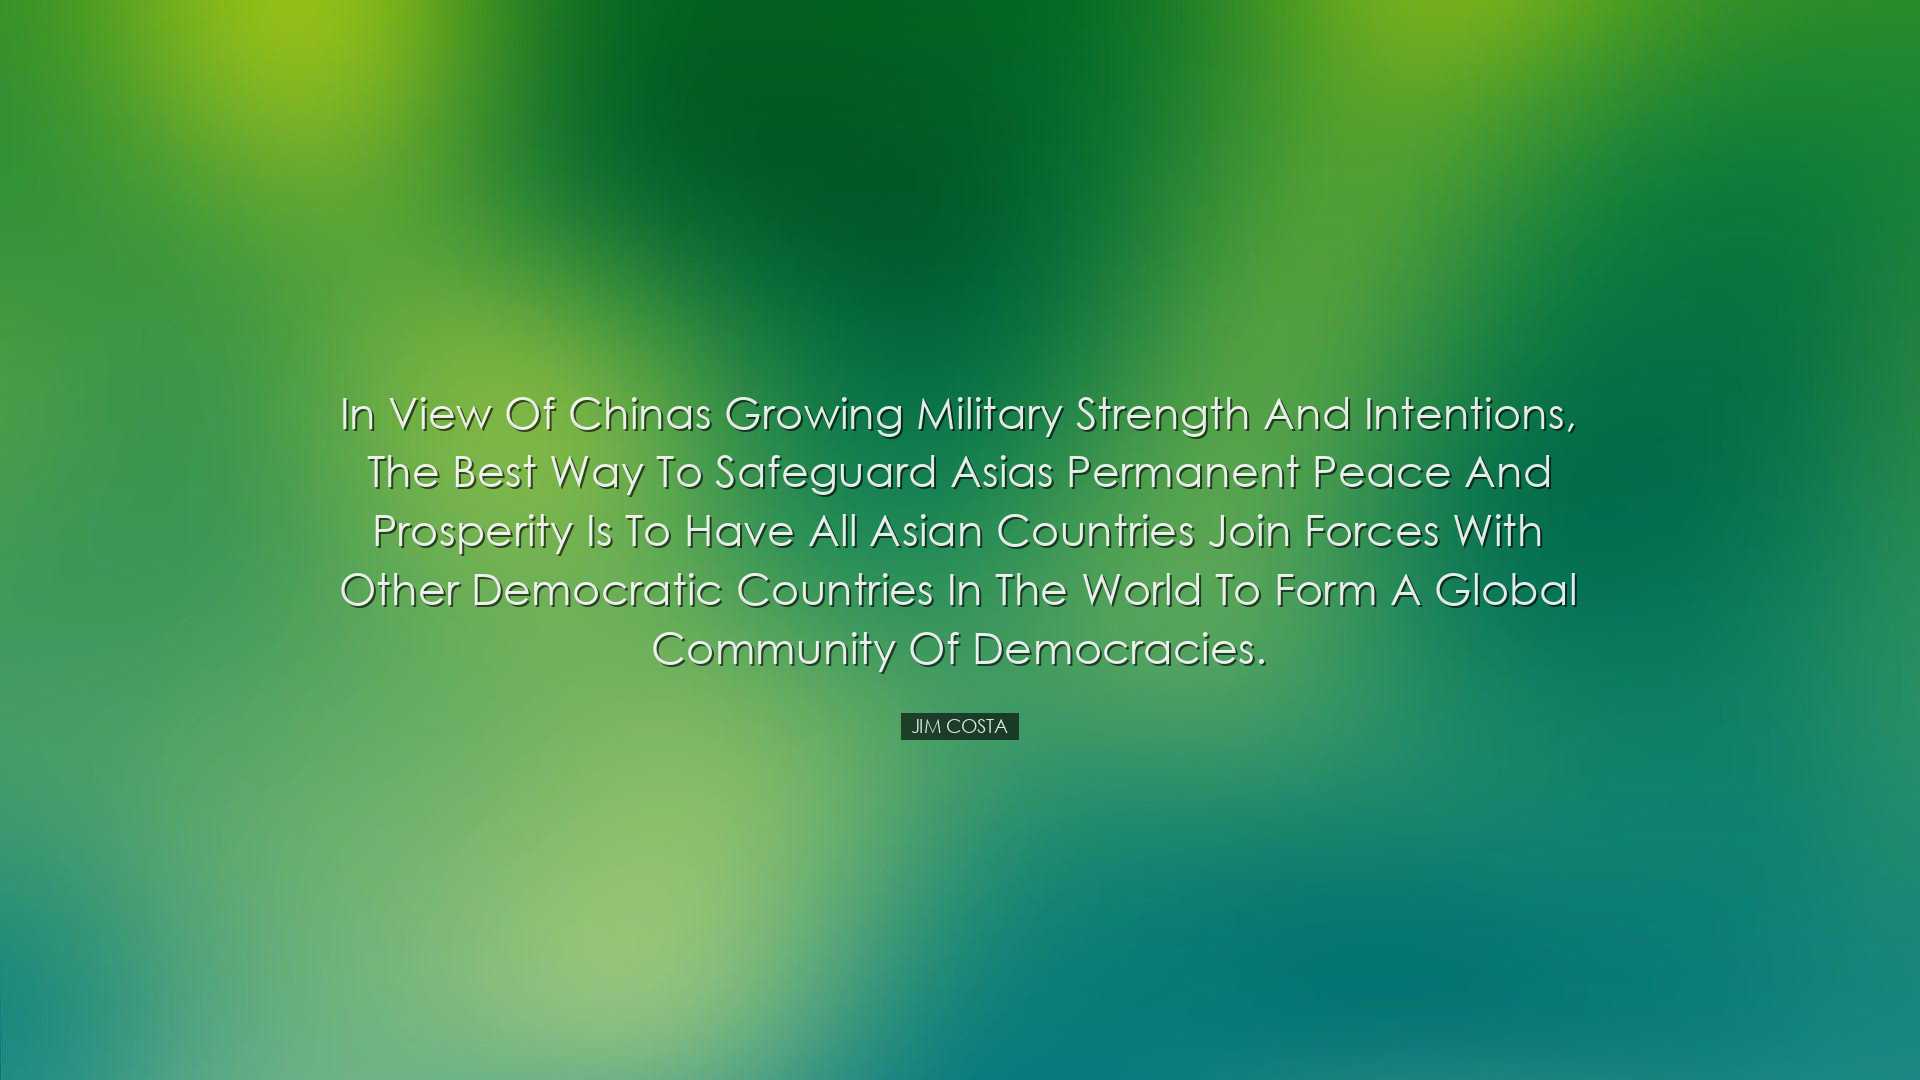 In view of Chinas growing military strength and intentions, the be